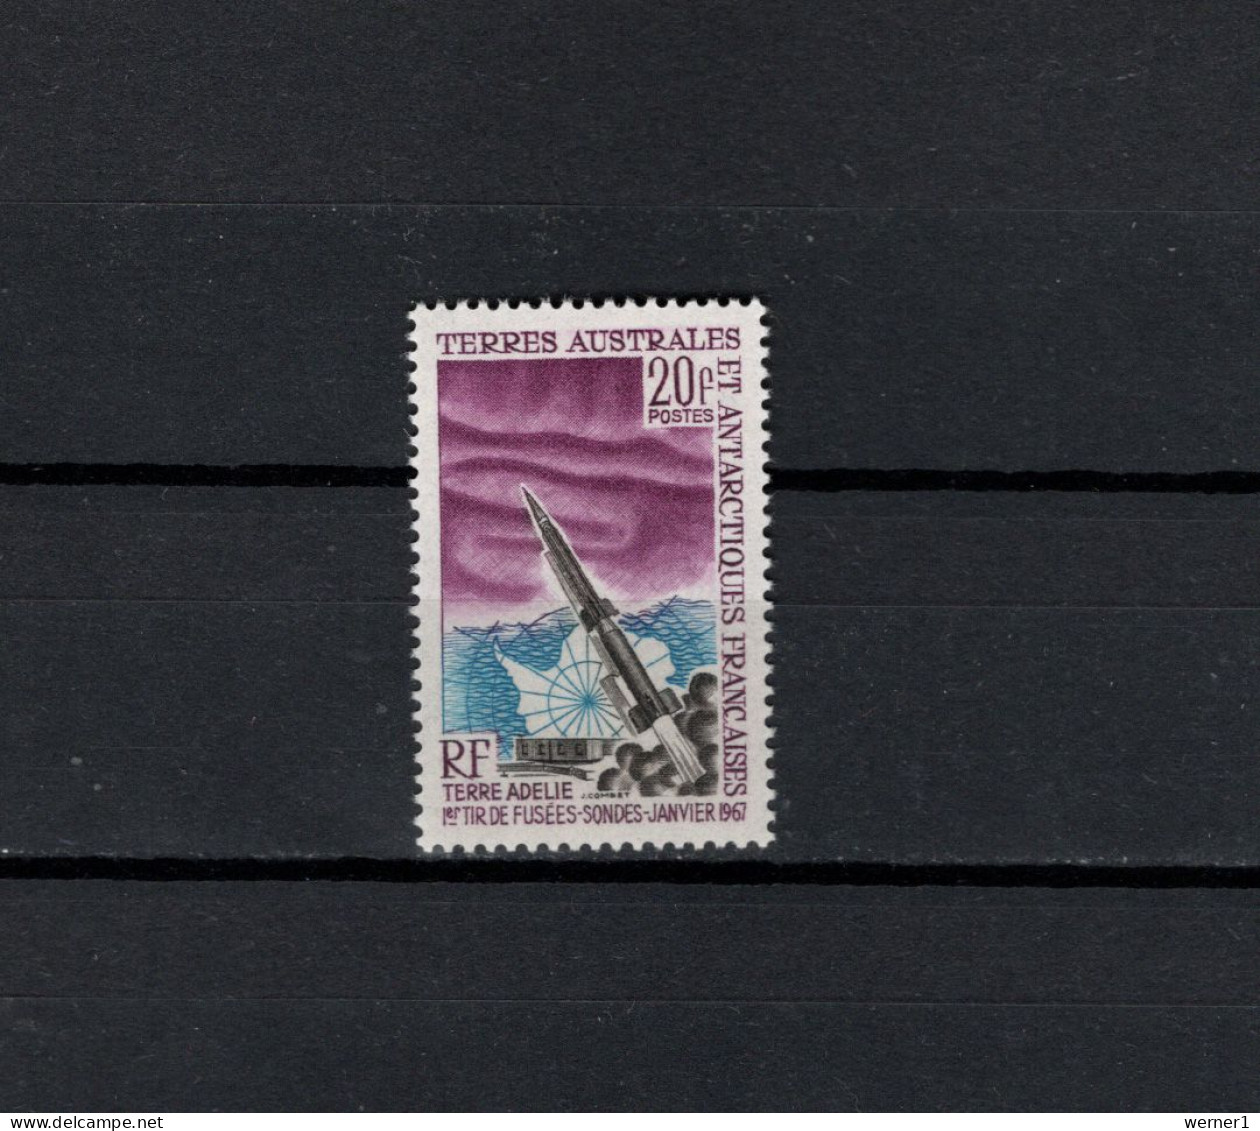 FSAT French Antarctic Territory 1967 Space, Dragon Rocket Stamp MNH - Océanie